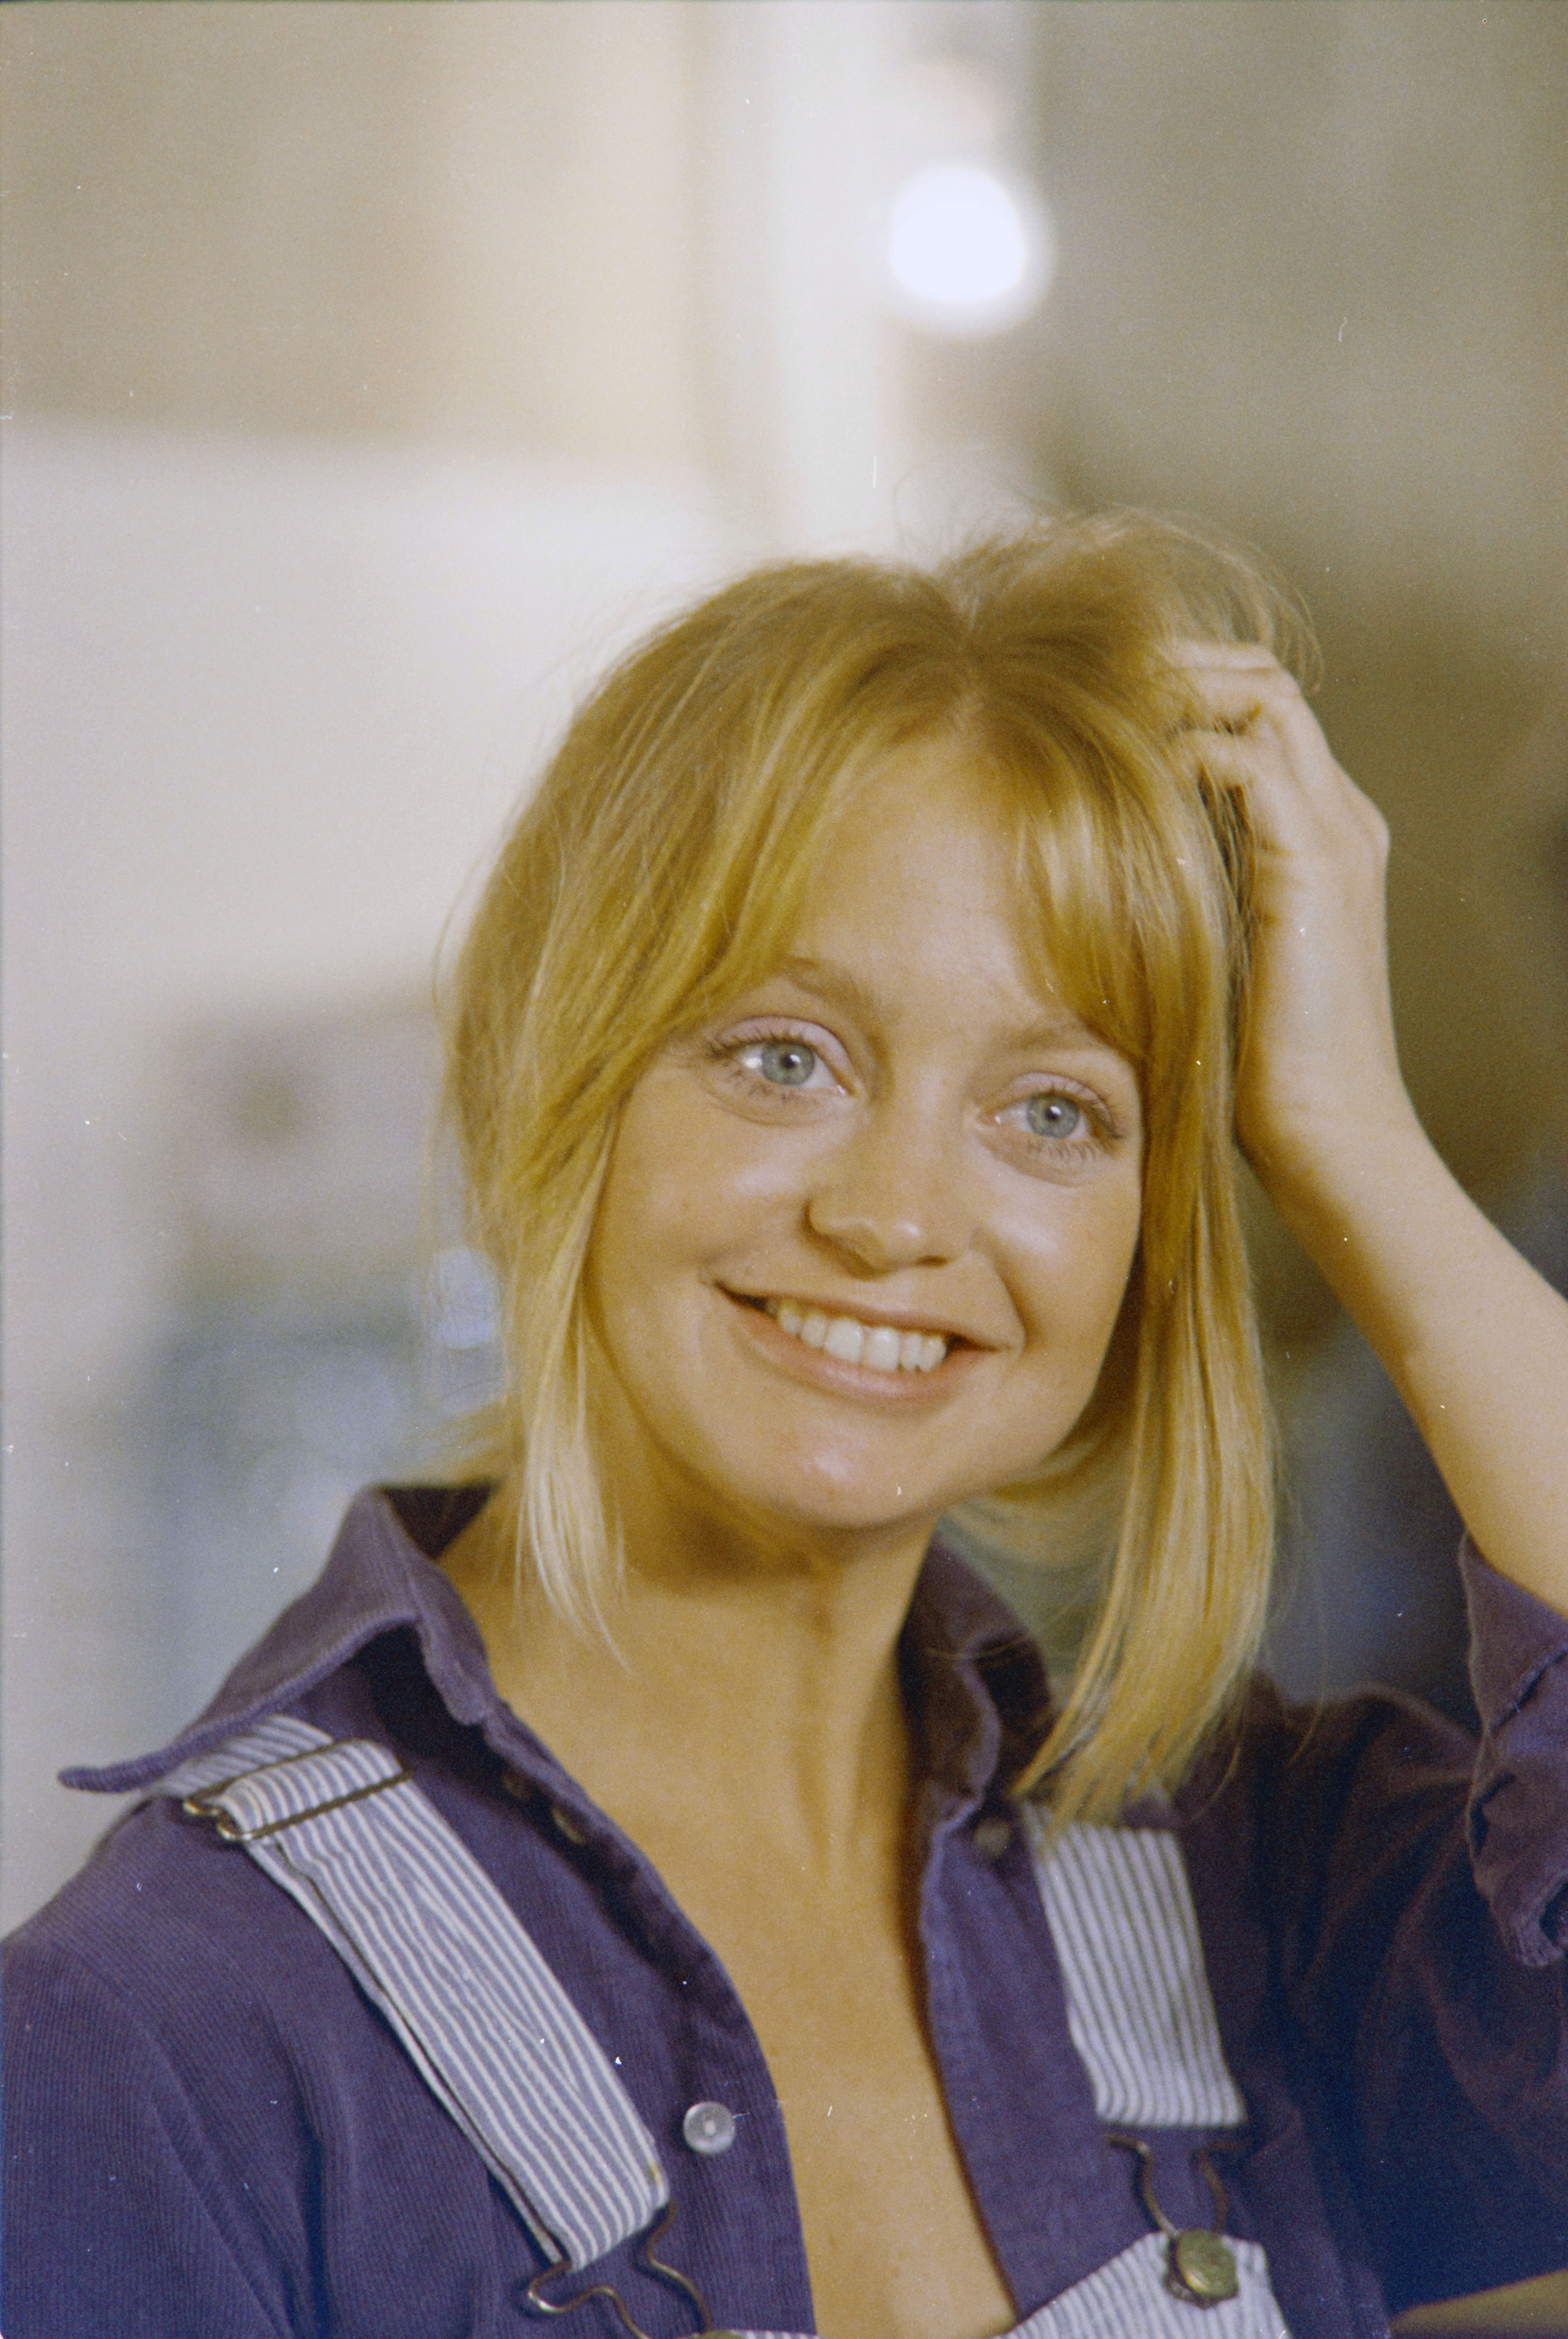 Goldie Hawn in the production "Shampoo" in Los Angeles, 1974 | Source: Getty Images